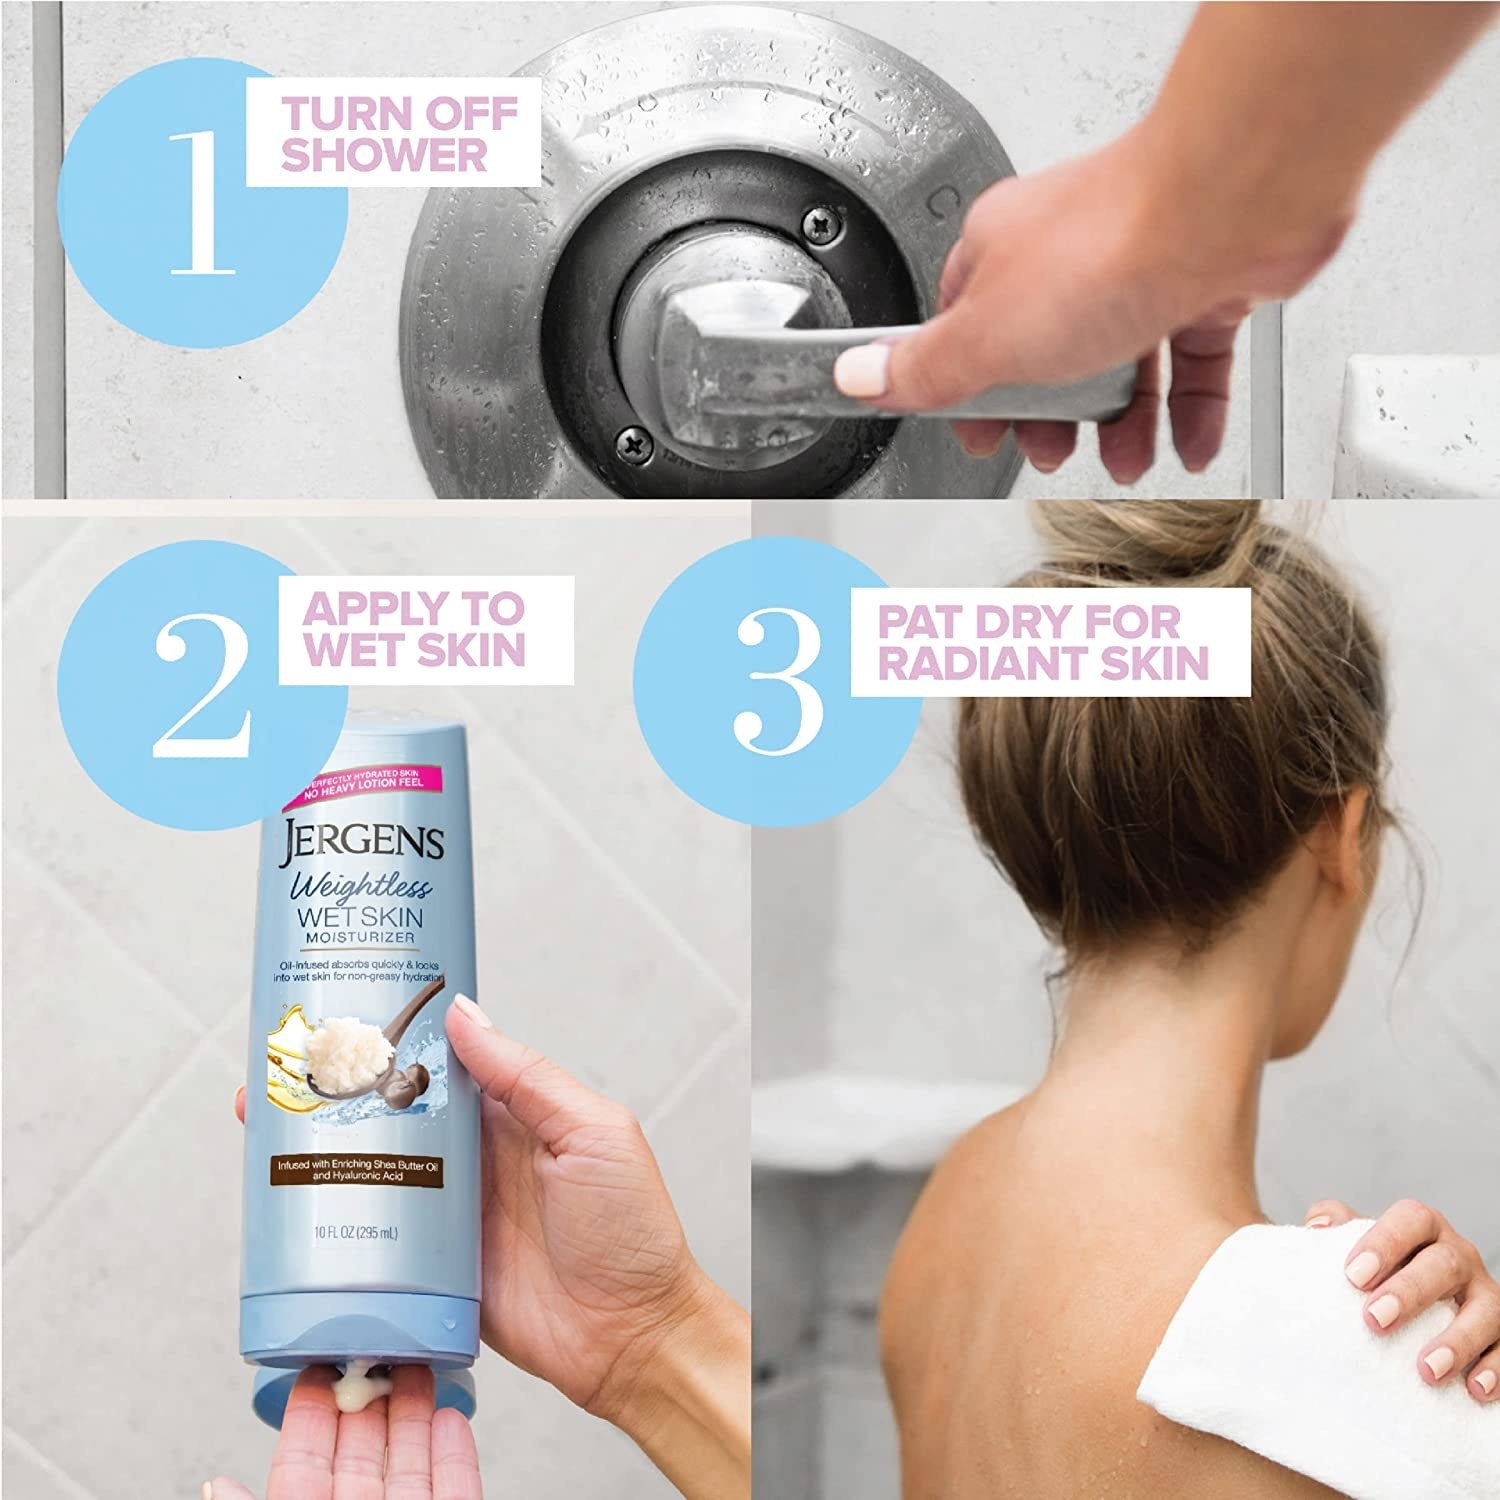 an instructional image showing someone turning off the shower, then applying the lotion to wet skin, then patting skin dry with a towel